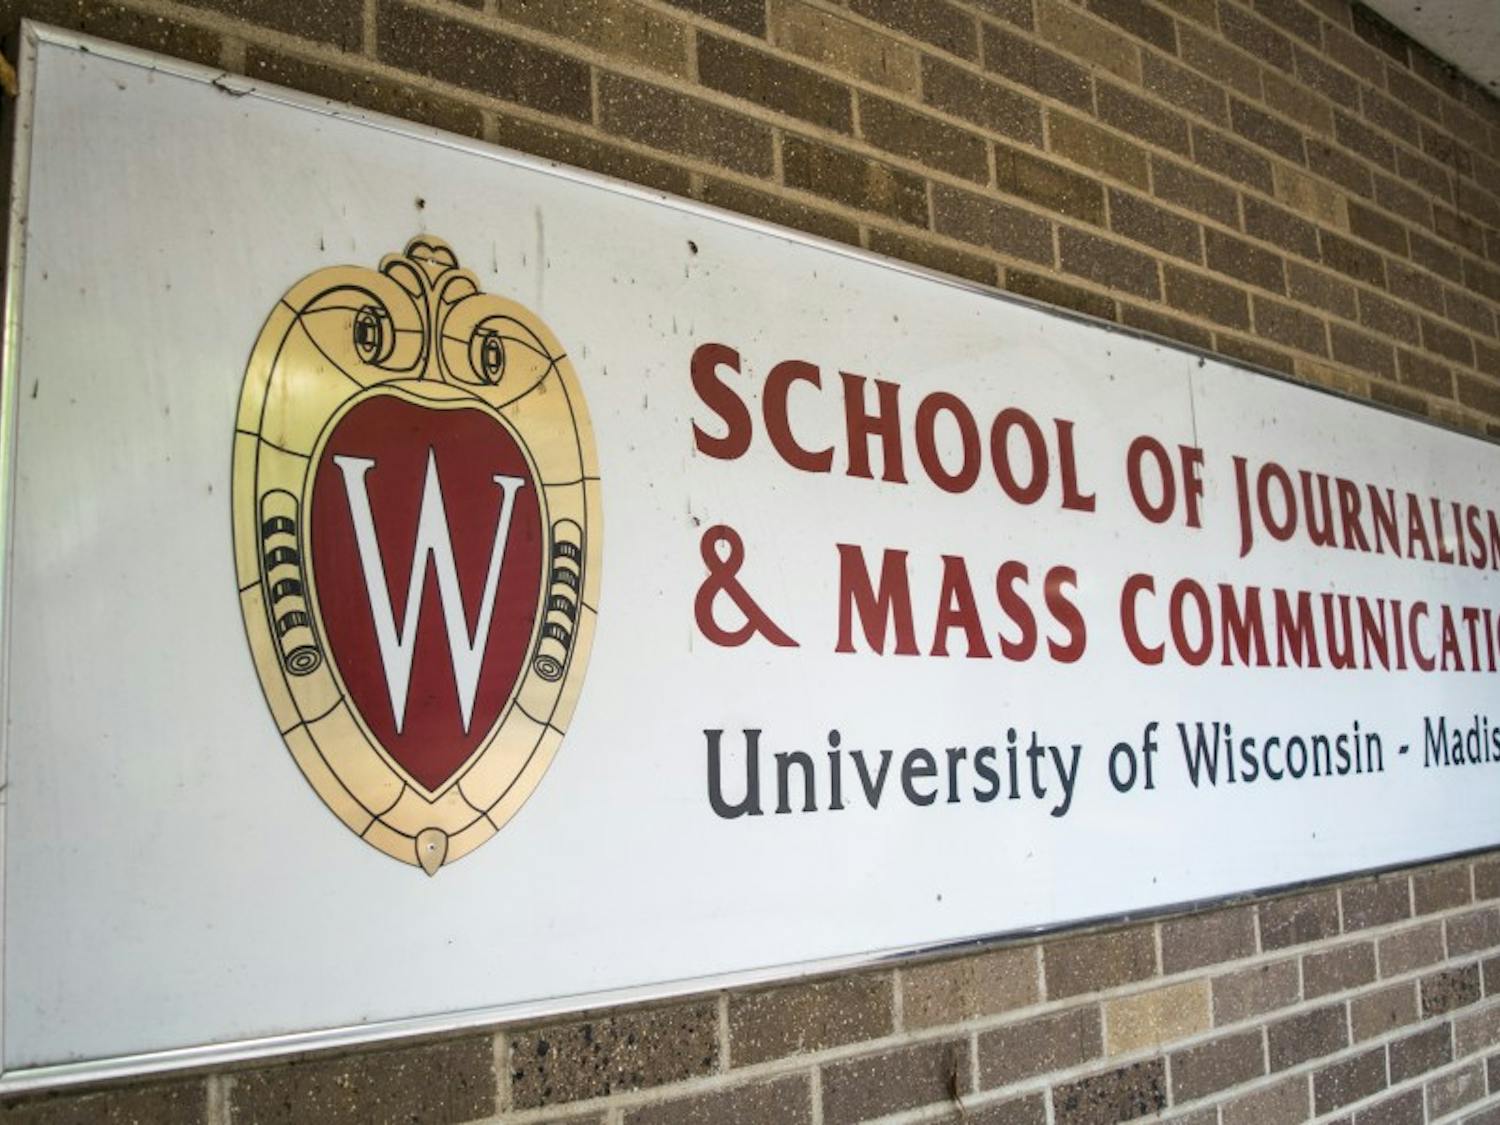 UW-Madison’s Science Writer in Residence Program, which is bringing writer Ed Yong to campus Oct. 2, is sponsored by the School of Journalism and Mass Communication and the office of University Communications.